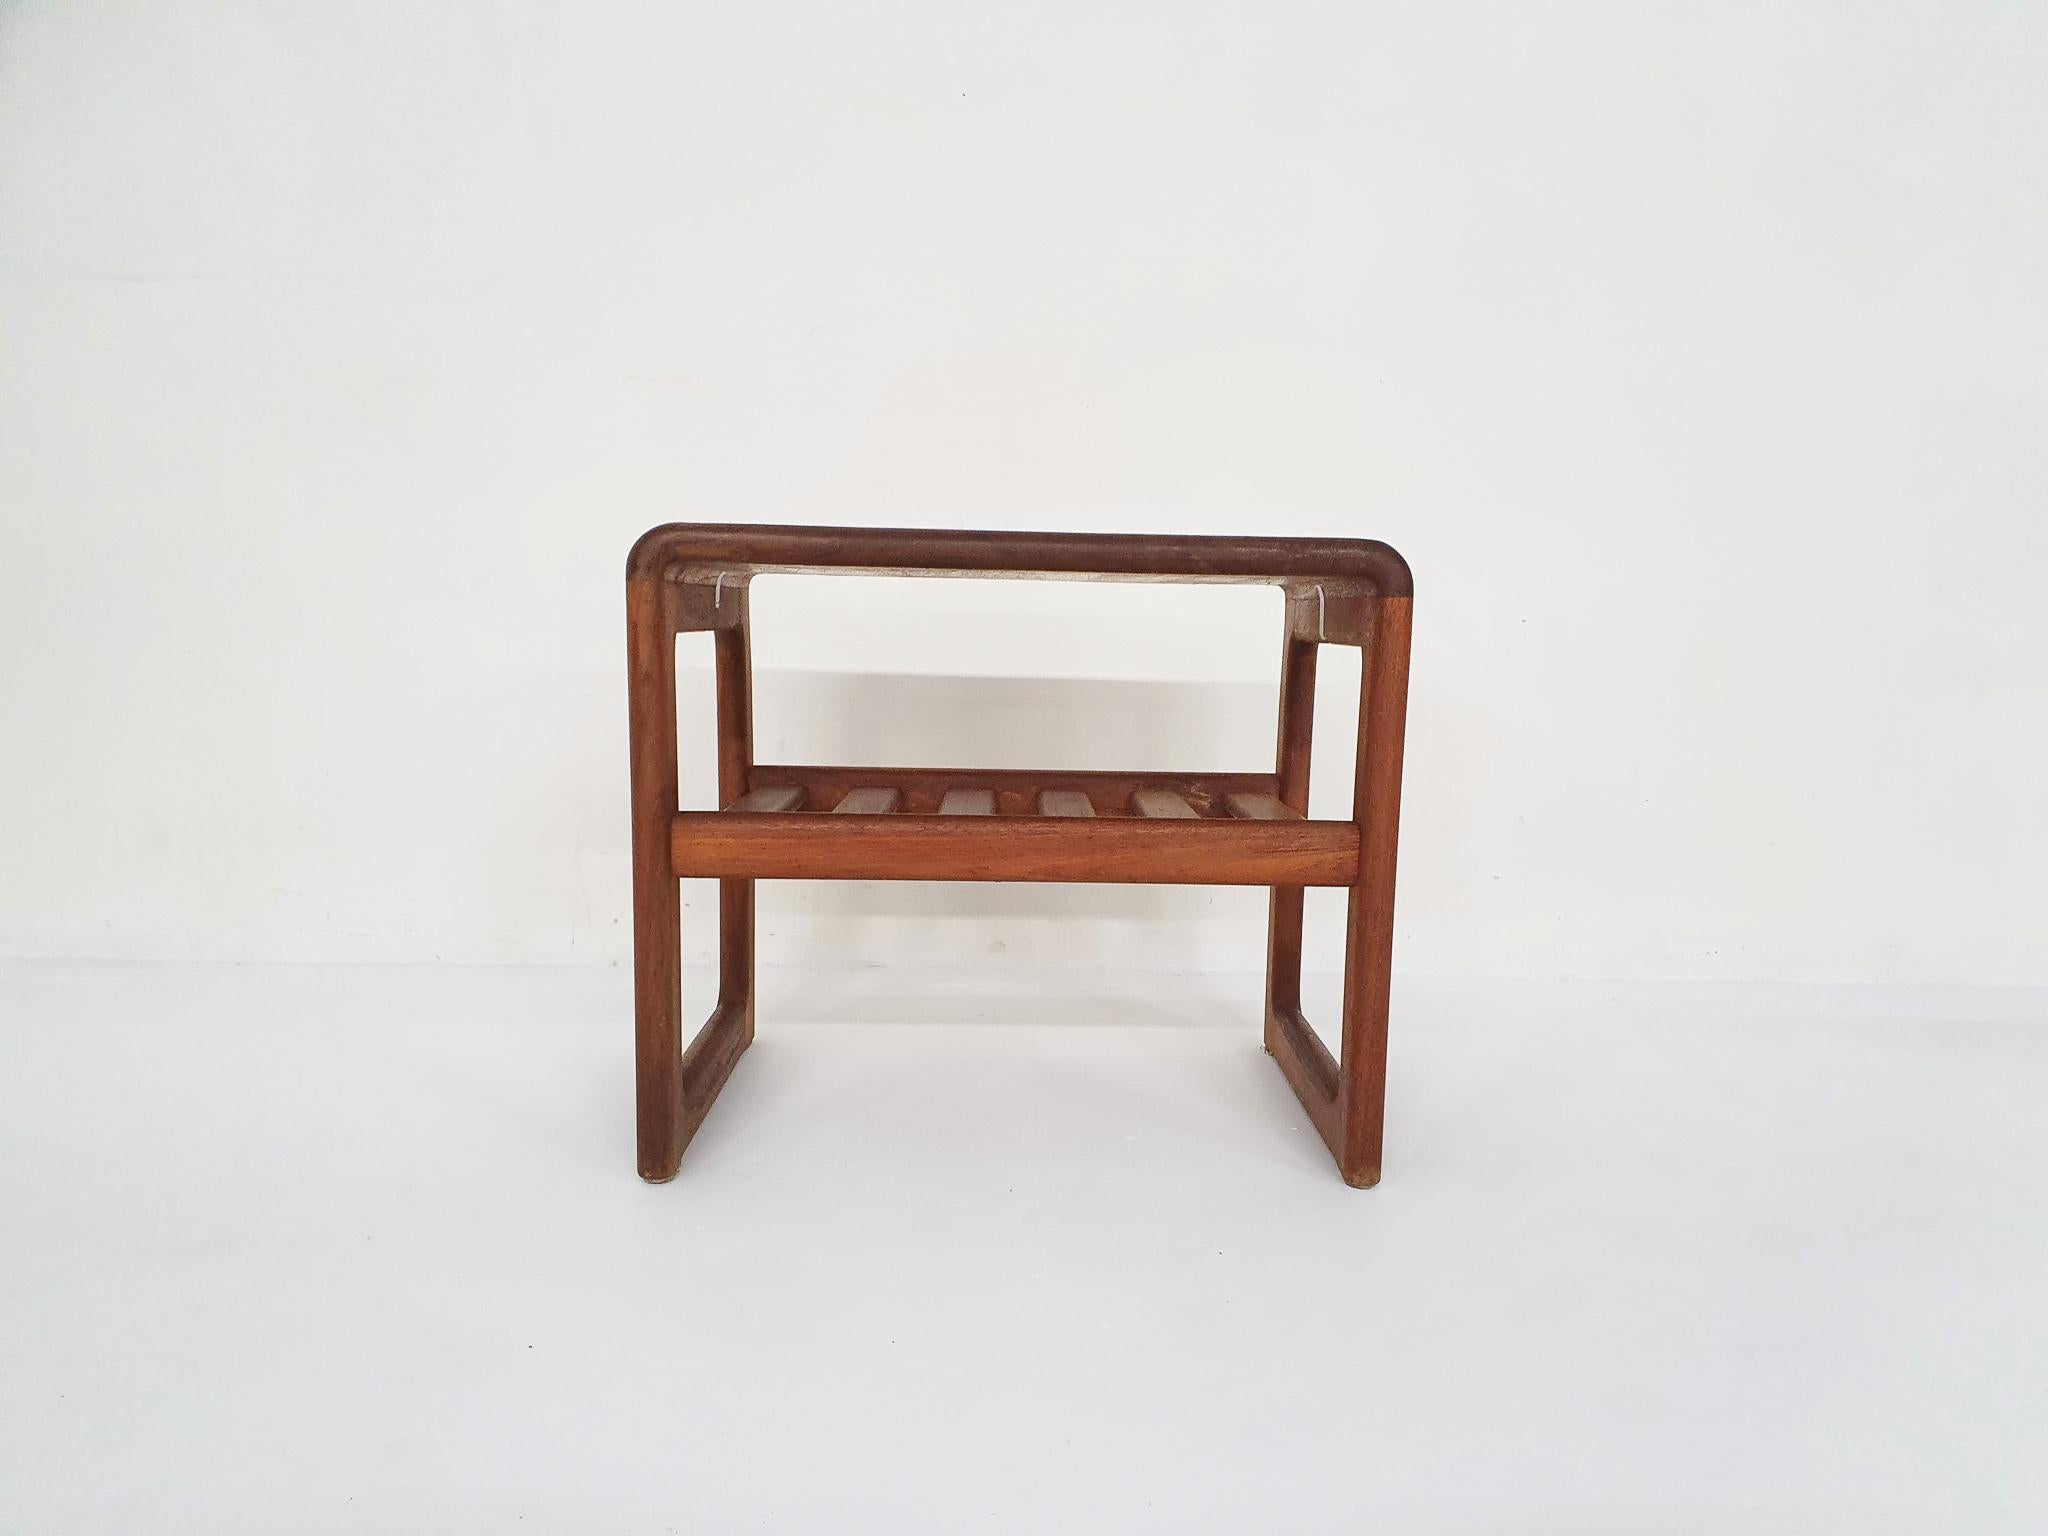 Teak side table with magazine rack, by the Danish manufacturer, Dyrlund.
The top has been sand and oiled. In good condition.